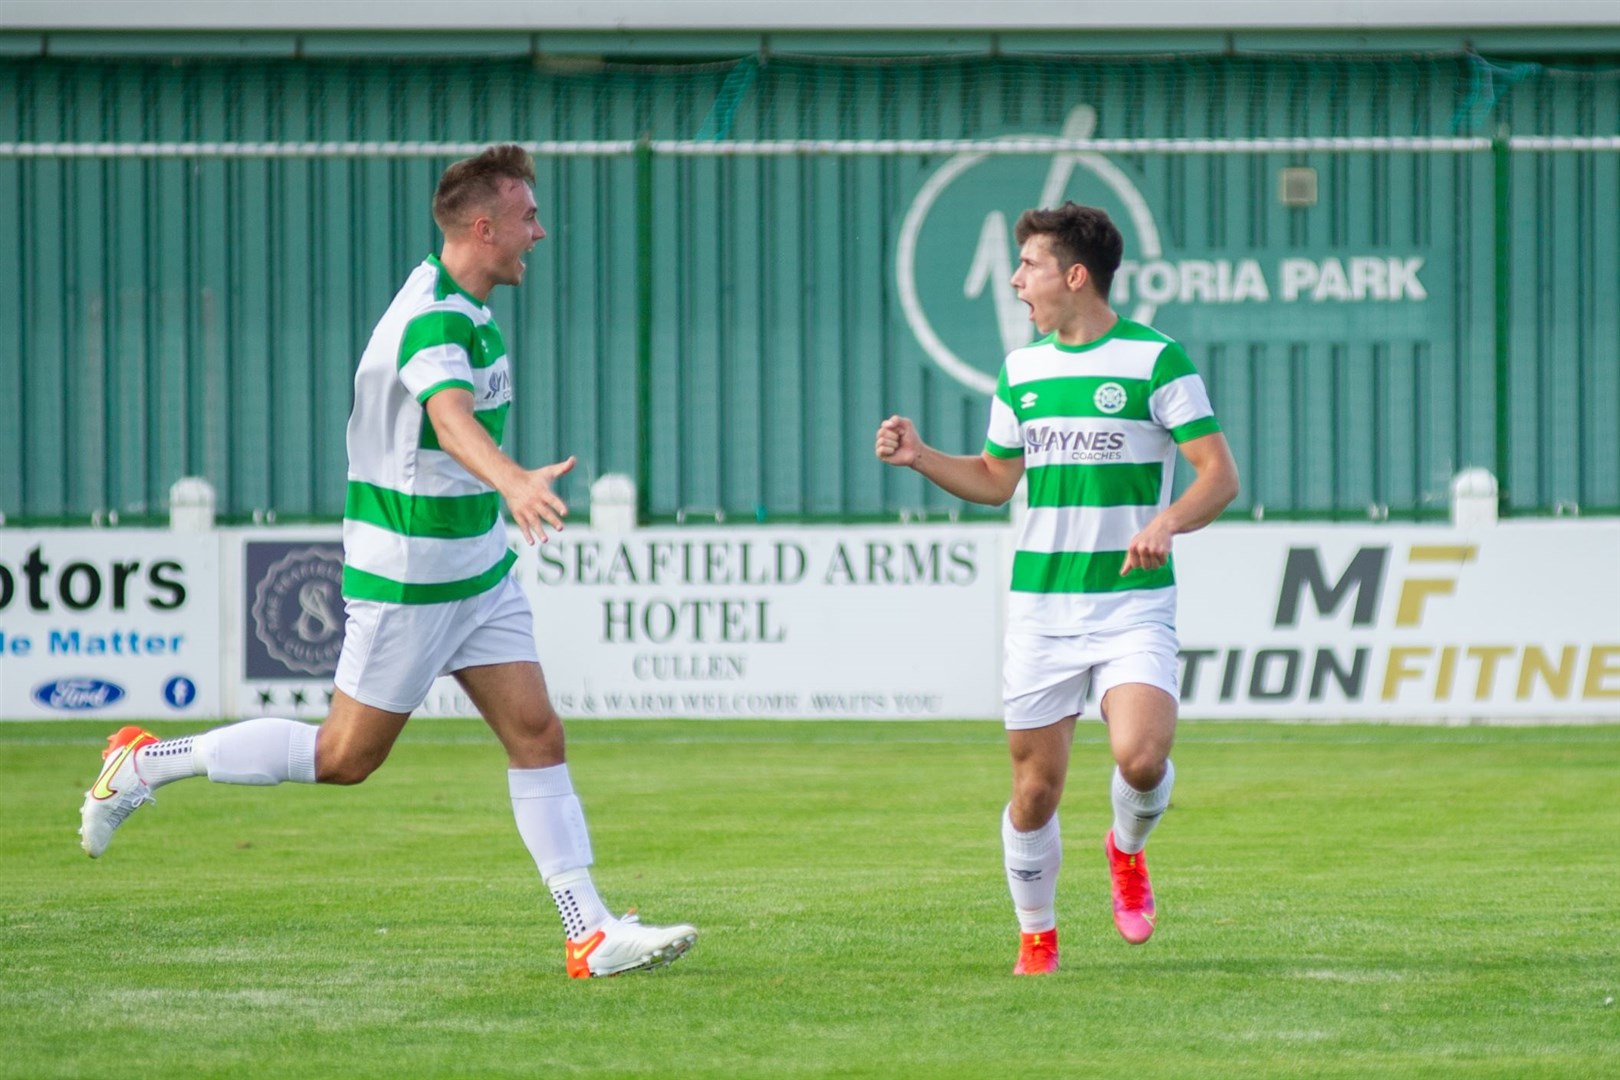 Jags goalscorer Max Barry (right) celebrates after scoring the opening goal with team mate Sam Pugh (left)...Buckie Thistle FC (4) vs Cumbernauld Colts FC (1) - Scottish Cup Round One replay - Victoria Park, Buckie 25/08/2021...Picture: Daniel Forsyth..